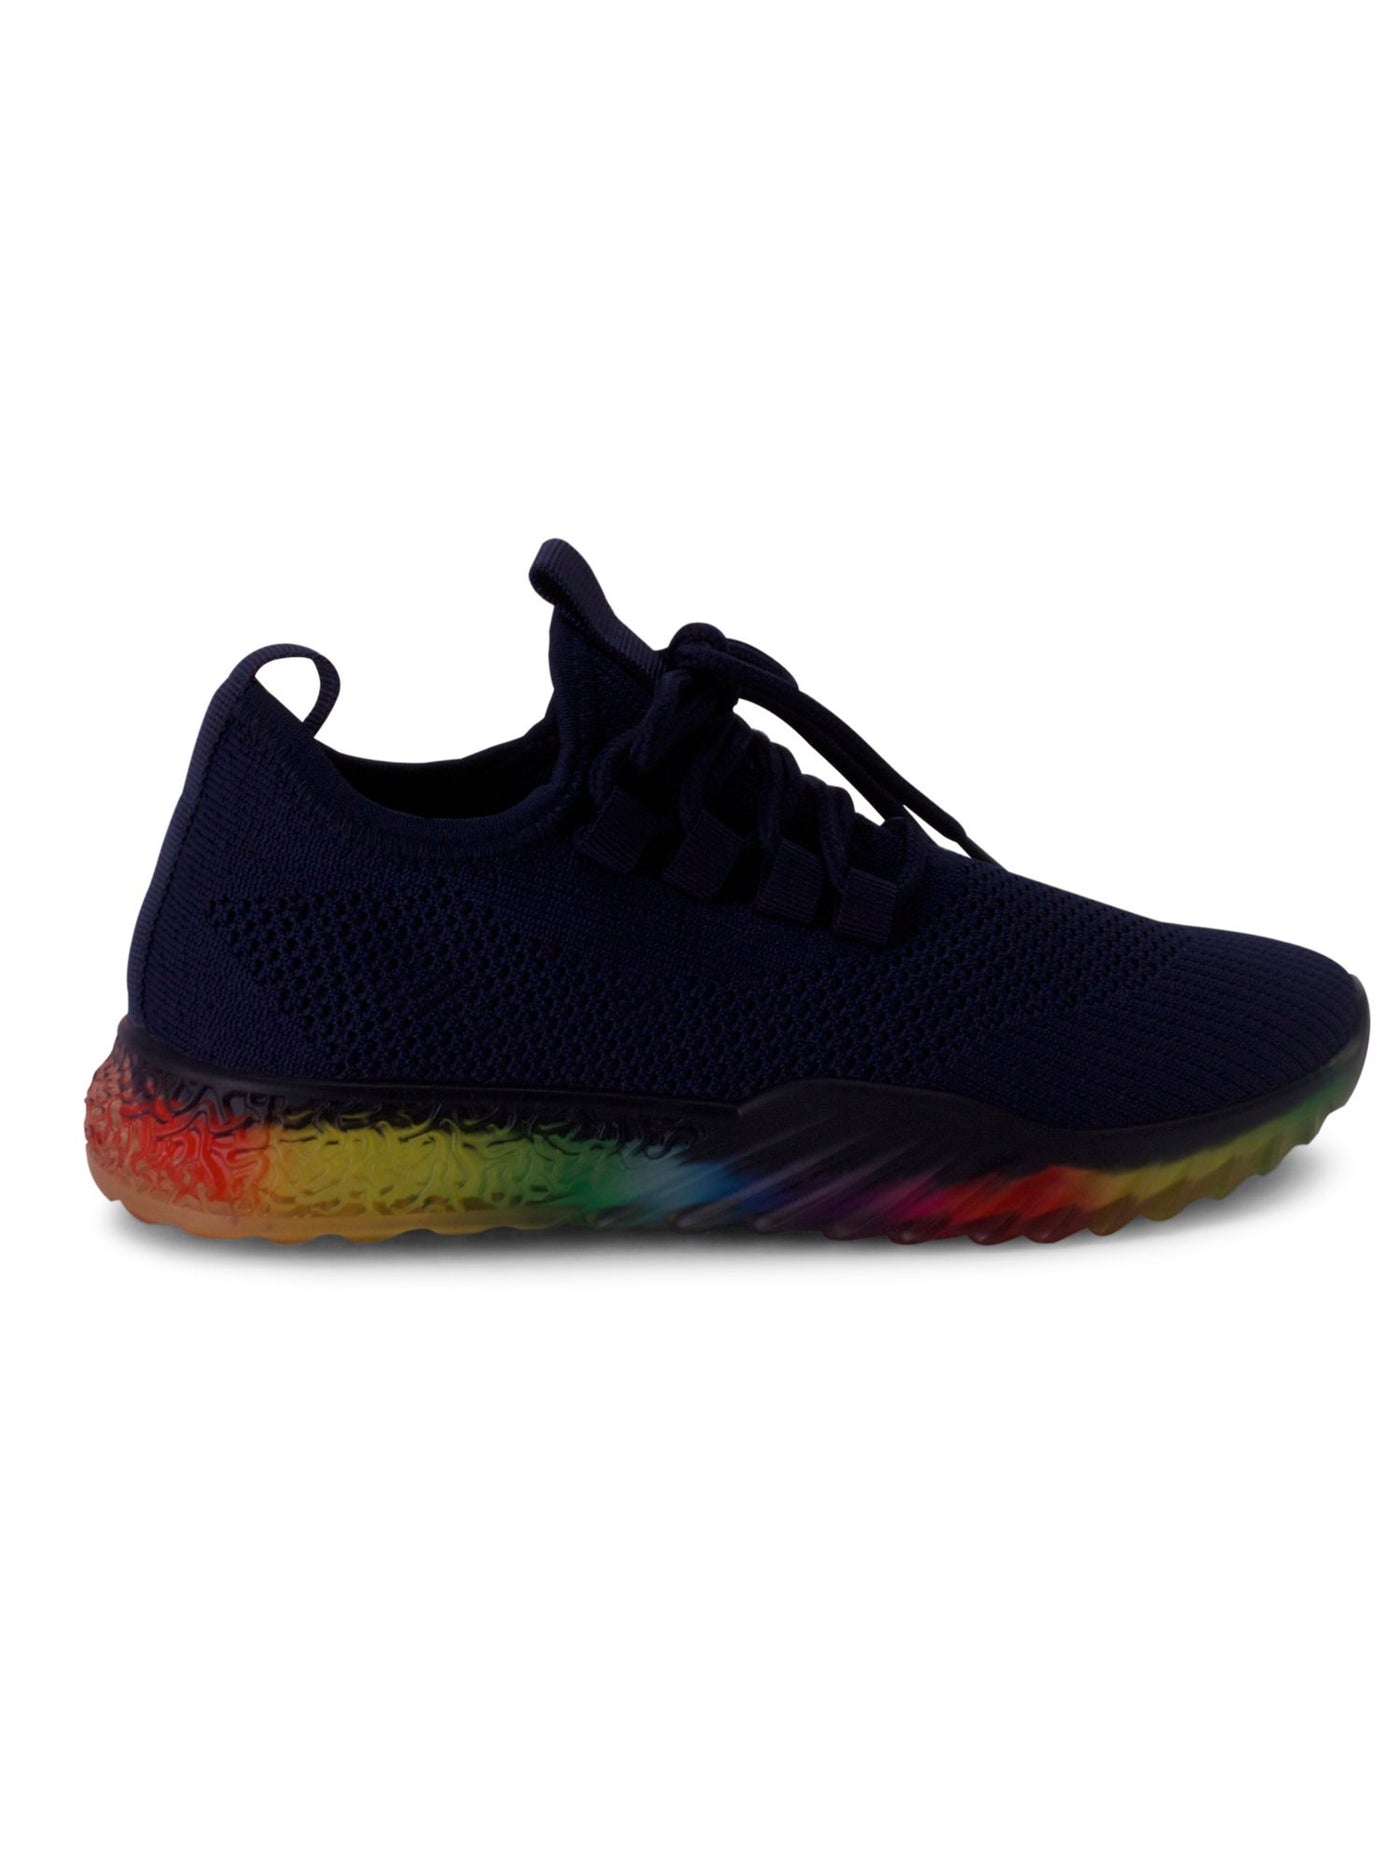 WANTED Womens Navy Rainbow 1/2" Platform Cushioned Stretch Felicity Round Toe Wedge Lace-Up Athletic Sneakers Shoes 11